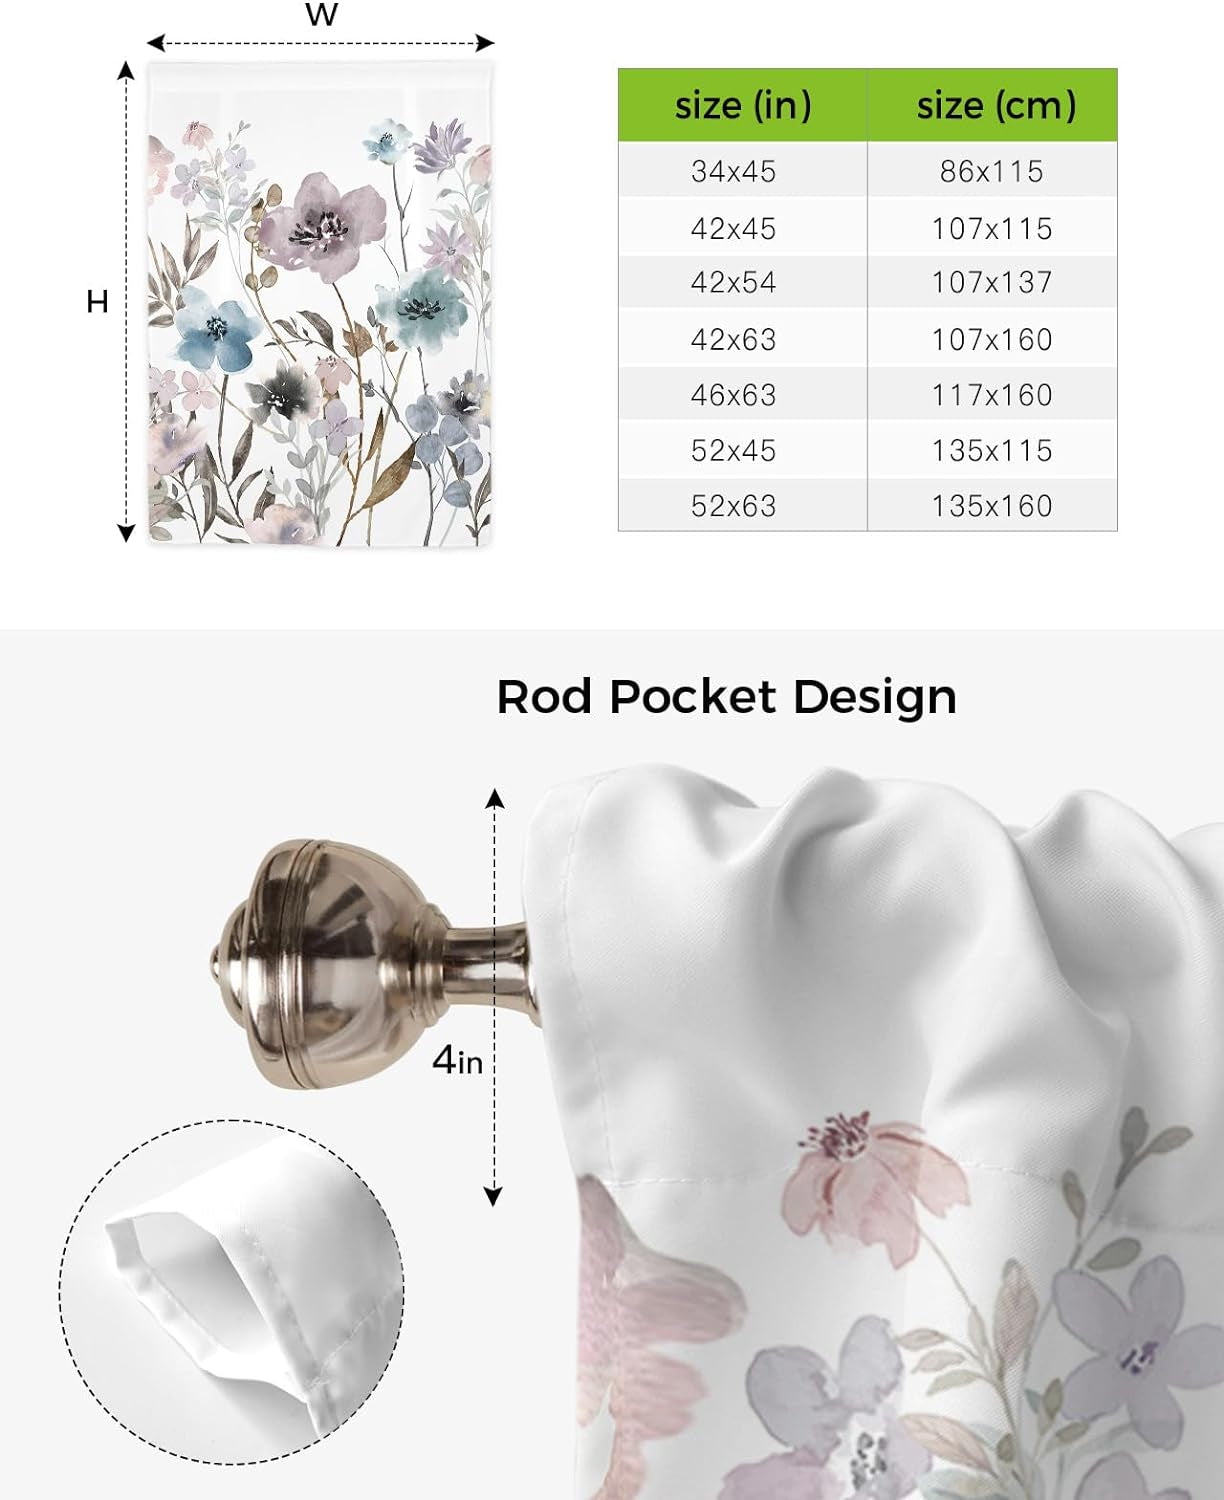 Tie up Watercolor Floral Valance Curtains for Windows, Adjustable Window Shade Valances for Kitchen Living Room Bathroom Rod Pocket Curtains Window Treatments Grey Blue Purple Herb Botanical 34"X45"